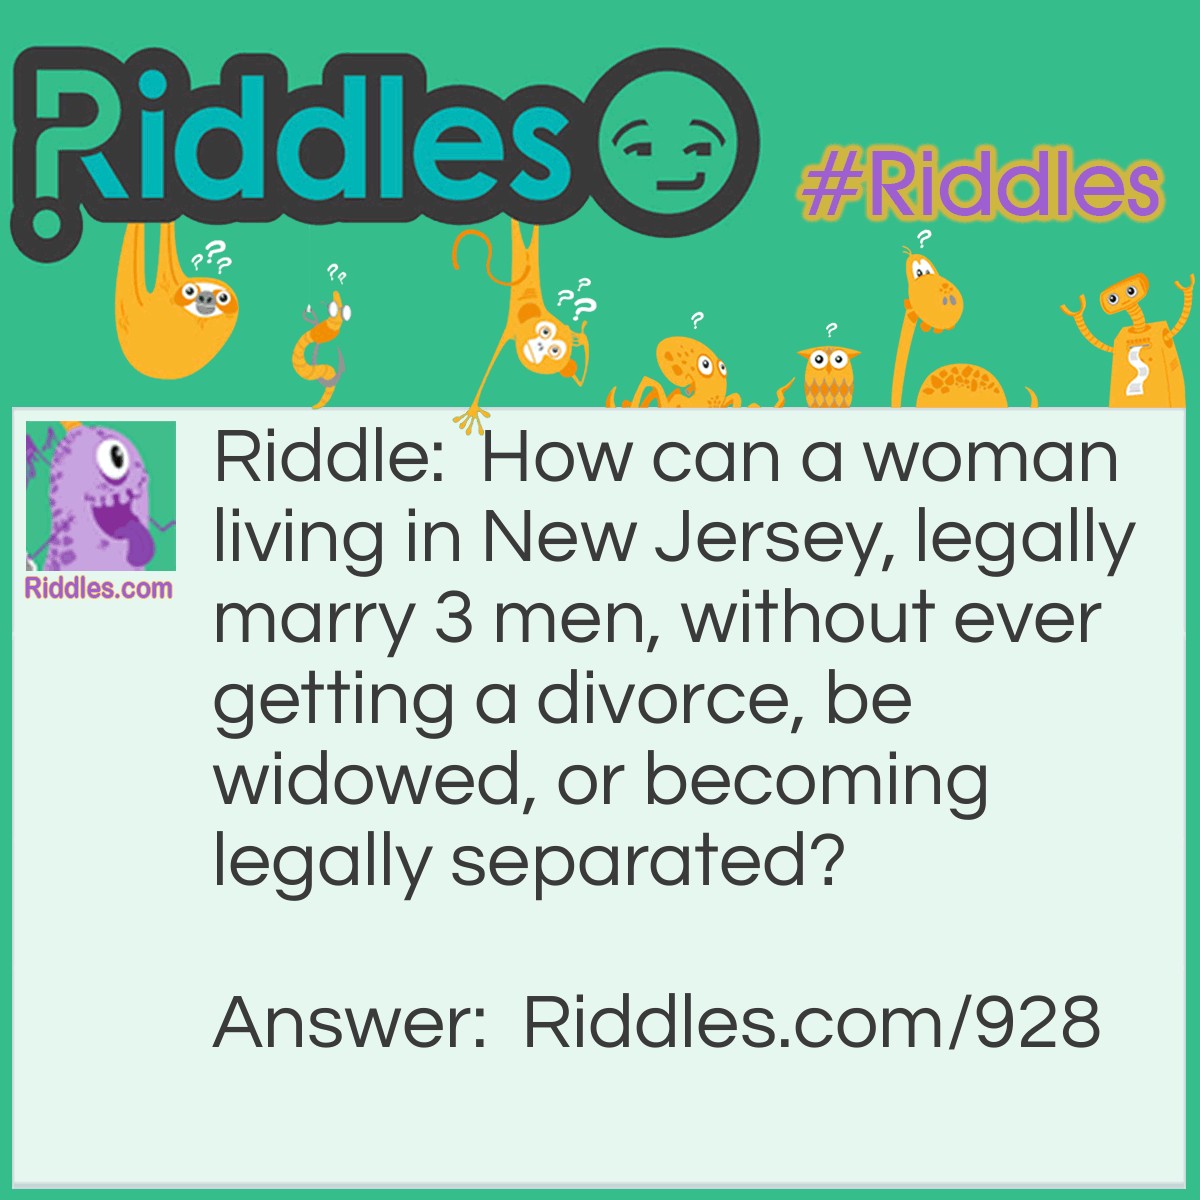 Riddle: How can a woman living in New Jersey, legally marry 3 men, without ever getting a divorce, be widowed, or becoming legally separated? Answer: She's a Justice of the Peace.